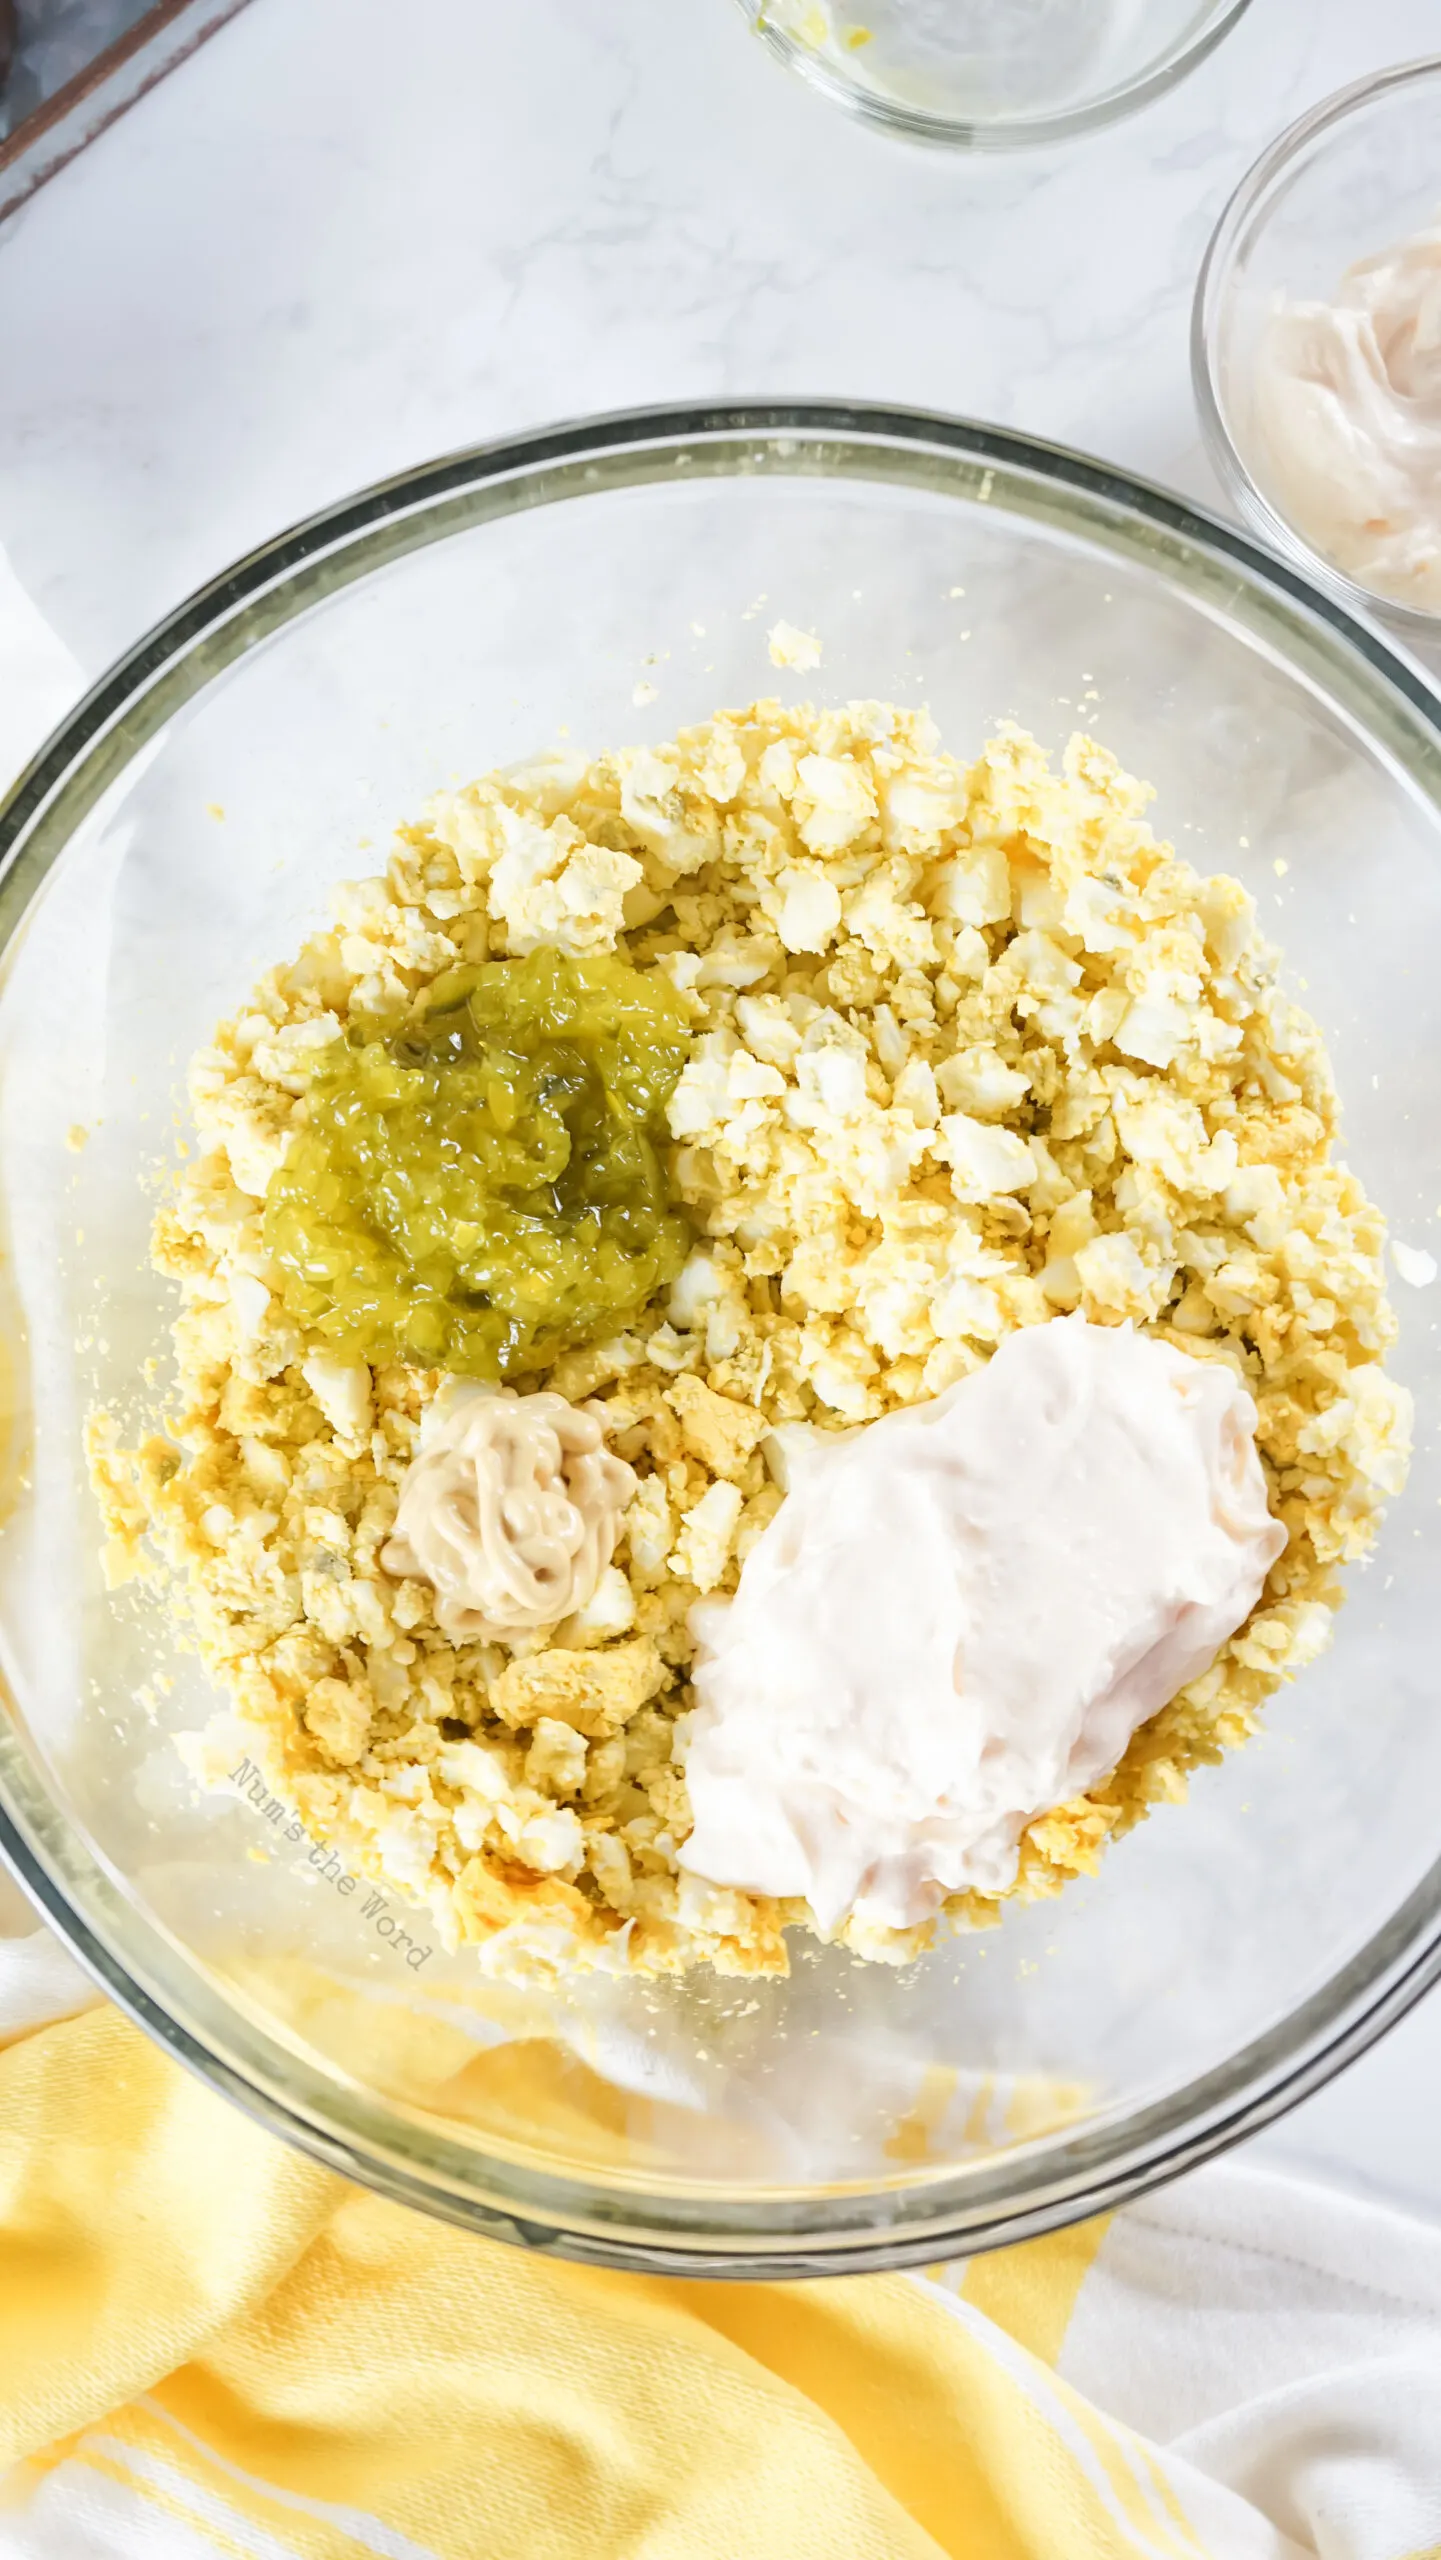 diced hard boiled eggs, mayonnaise, pickle relish and Dijon mustard in a bowl, unmixed.